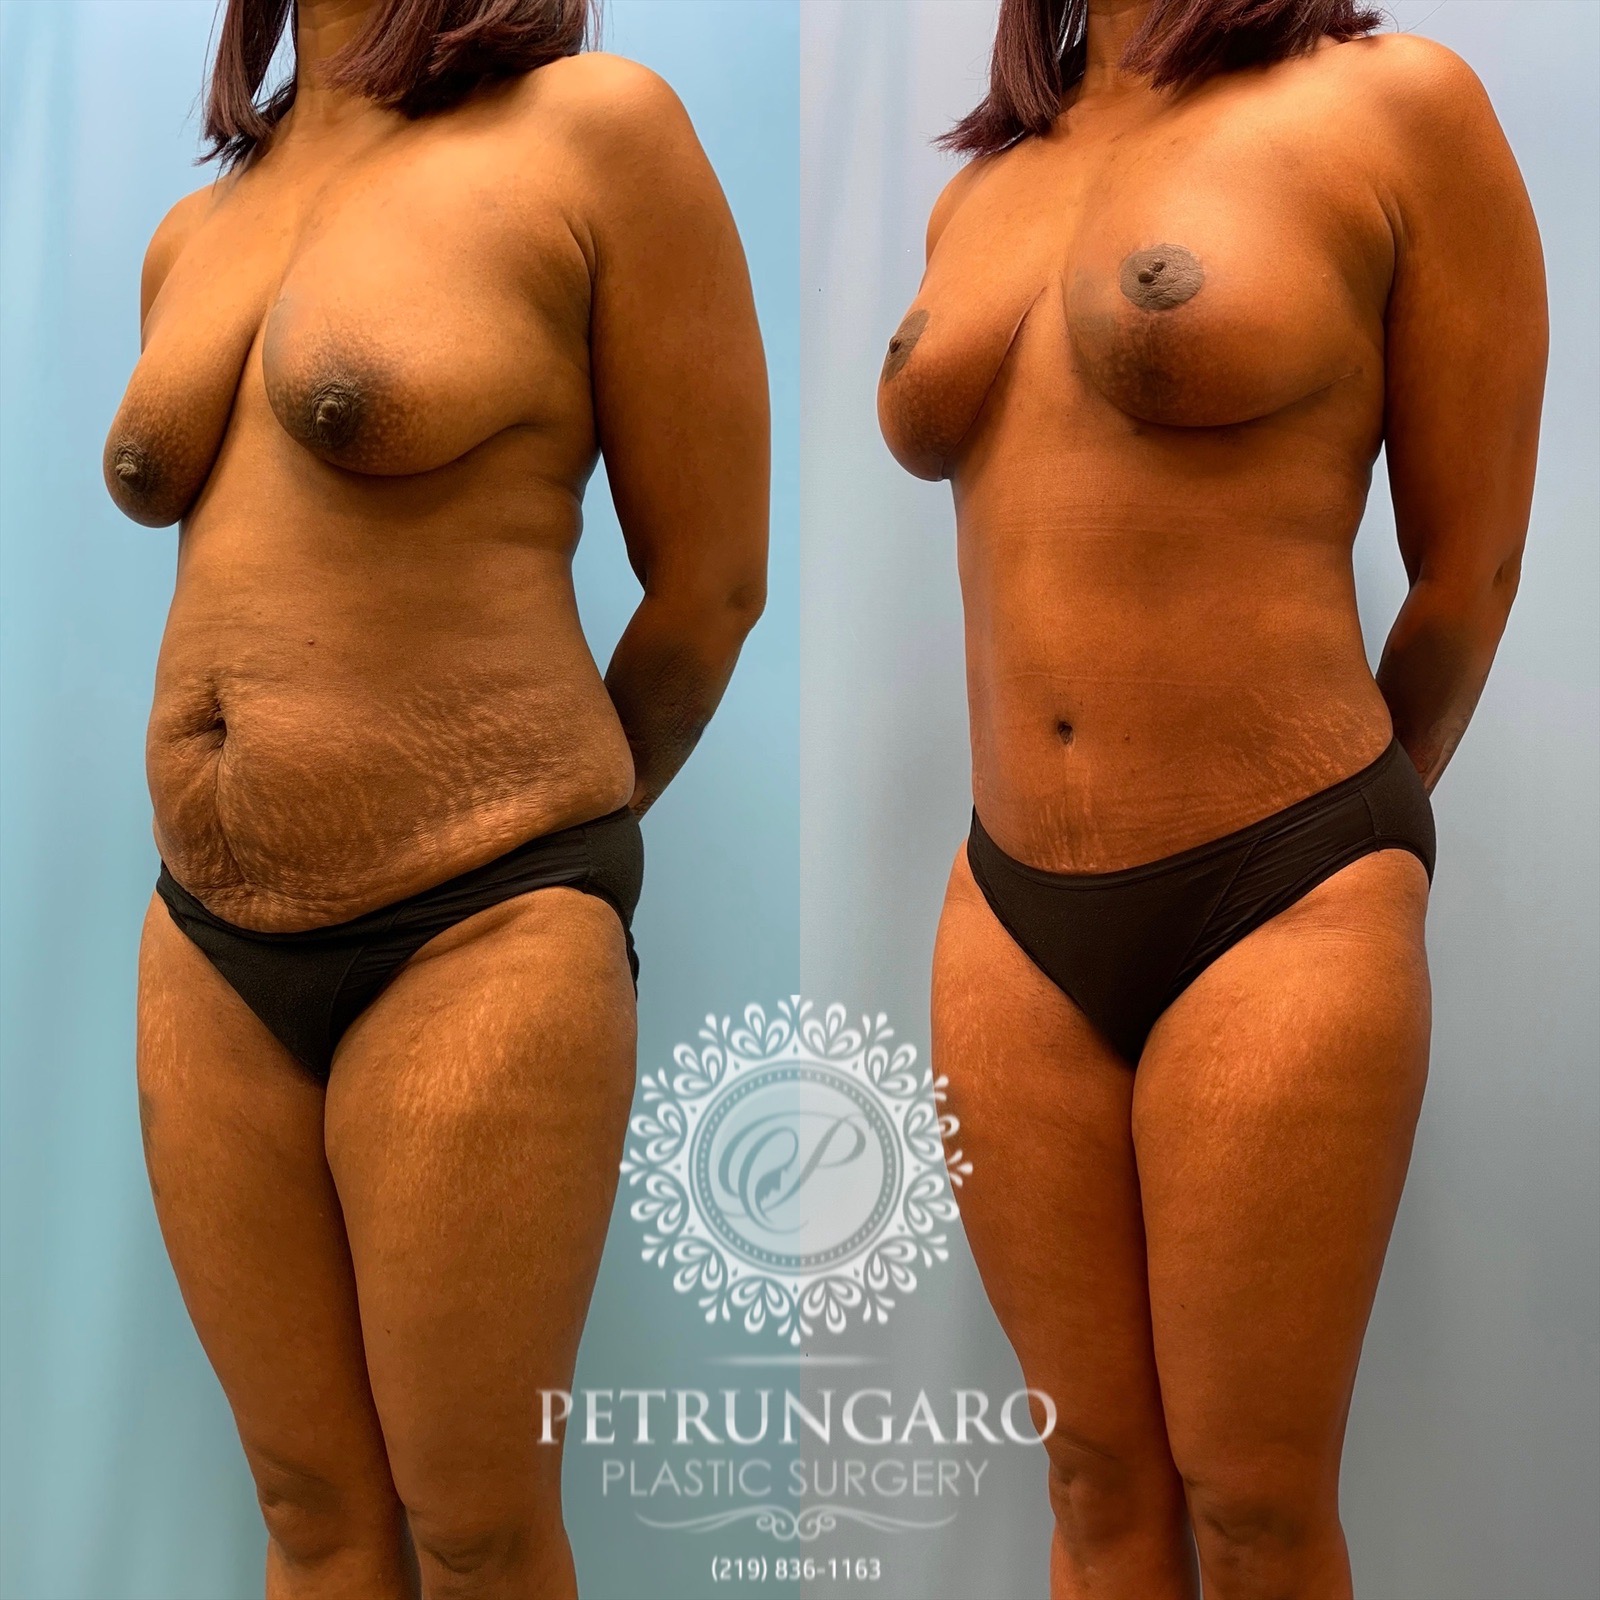 43 year old woman 3 months after Mommy Makeover-5